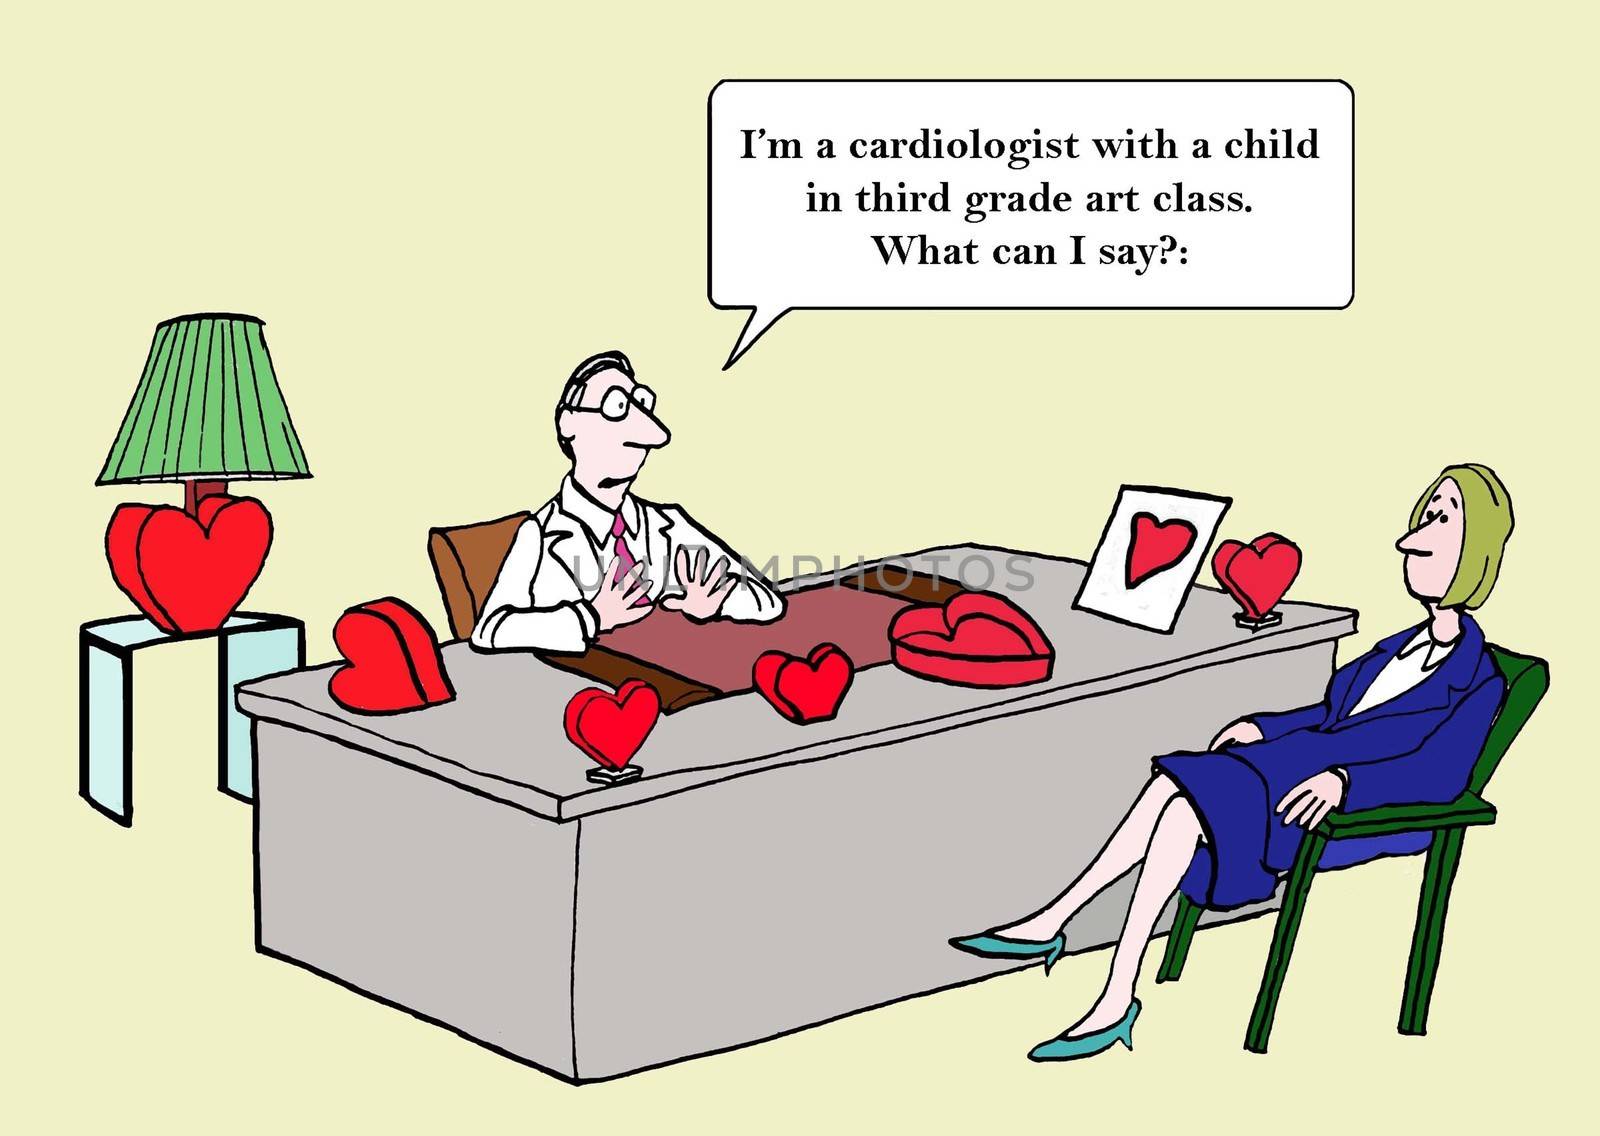 "I'm a cardiologist with a child in third grade art class.  What can I say?"